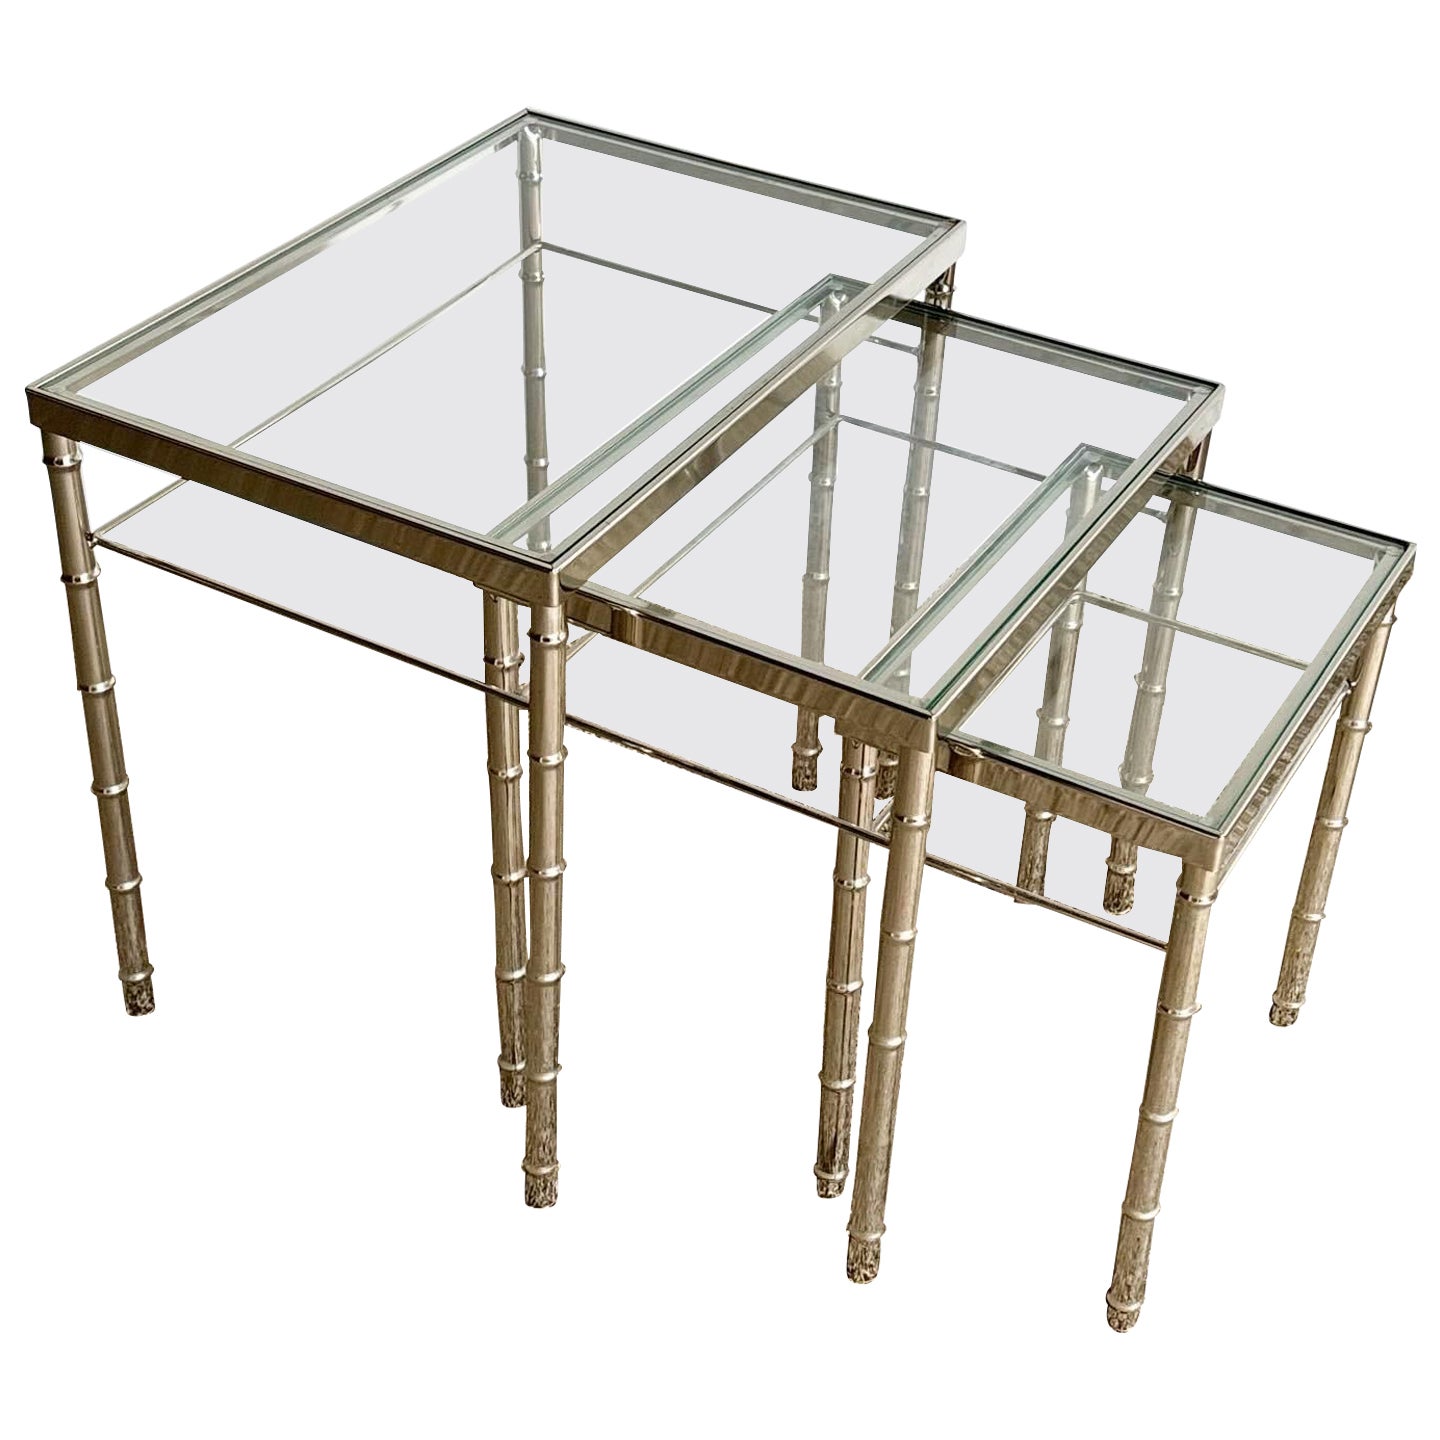 Mid Century Modern Chrome Faux Bamboo Glass Top Nesting Tables - Set of 3 For Sale